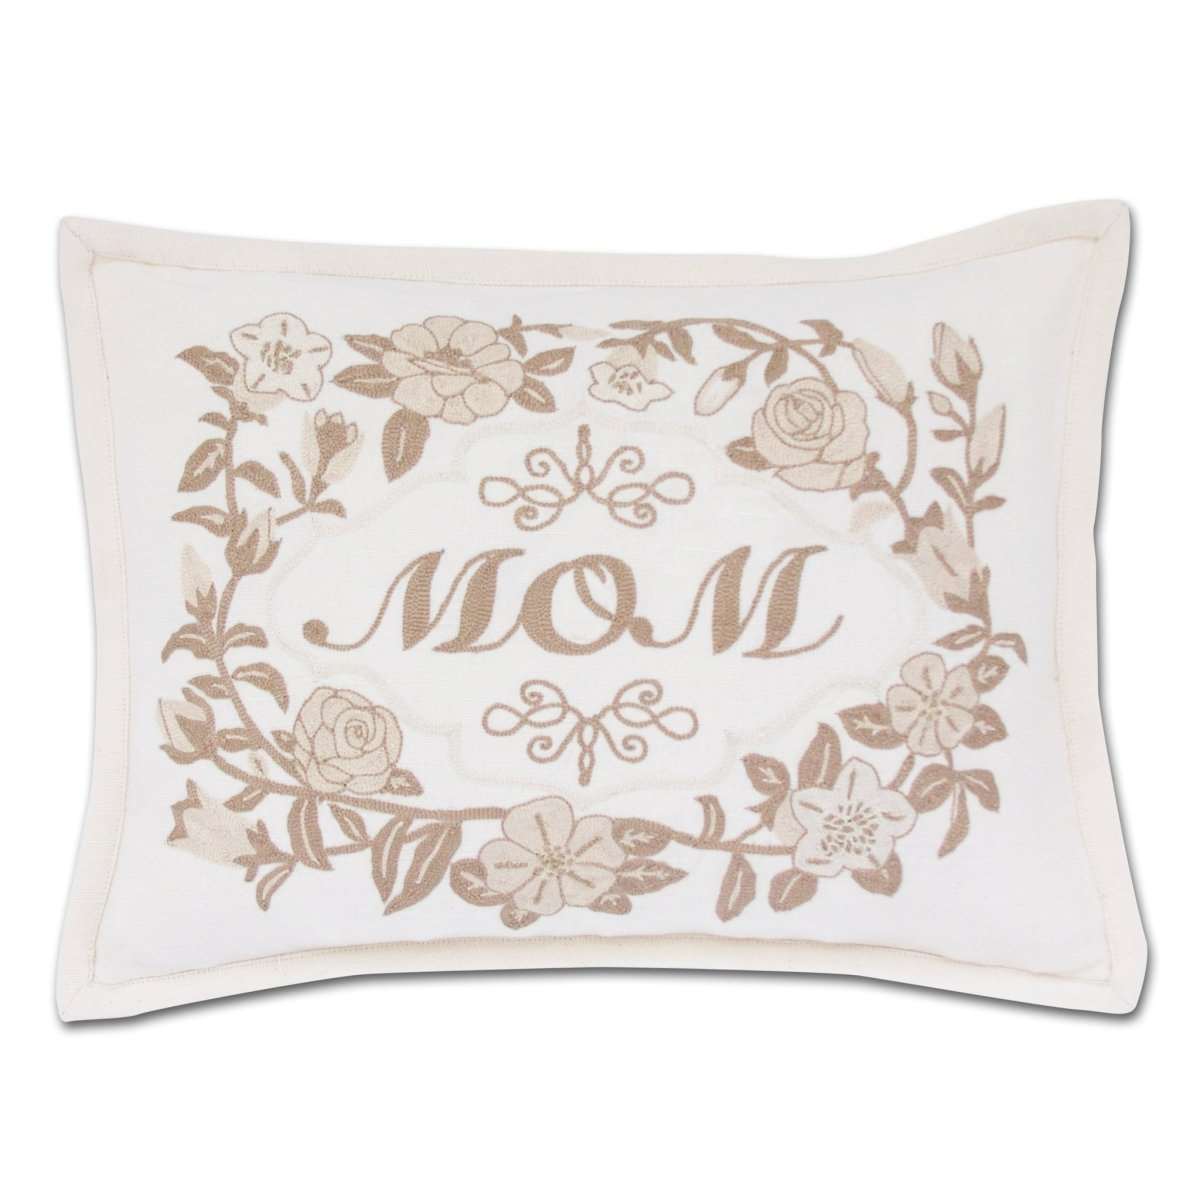 Mom Love Letters Hand-Embroidered Pillow - Available in Rose and Natural - Eclectic Treasures